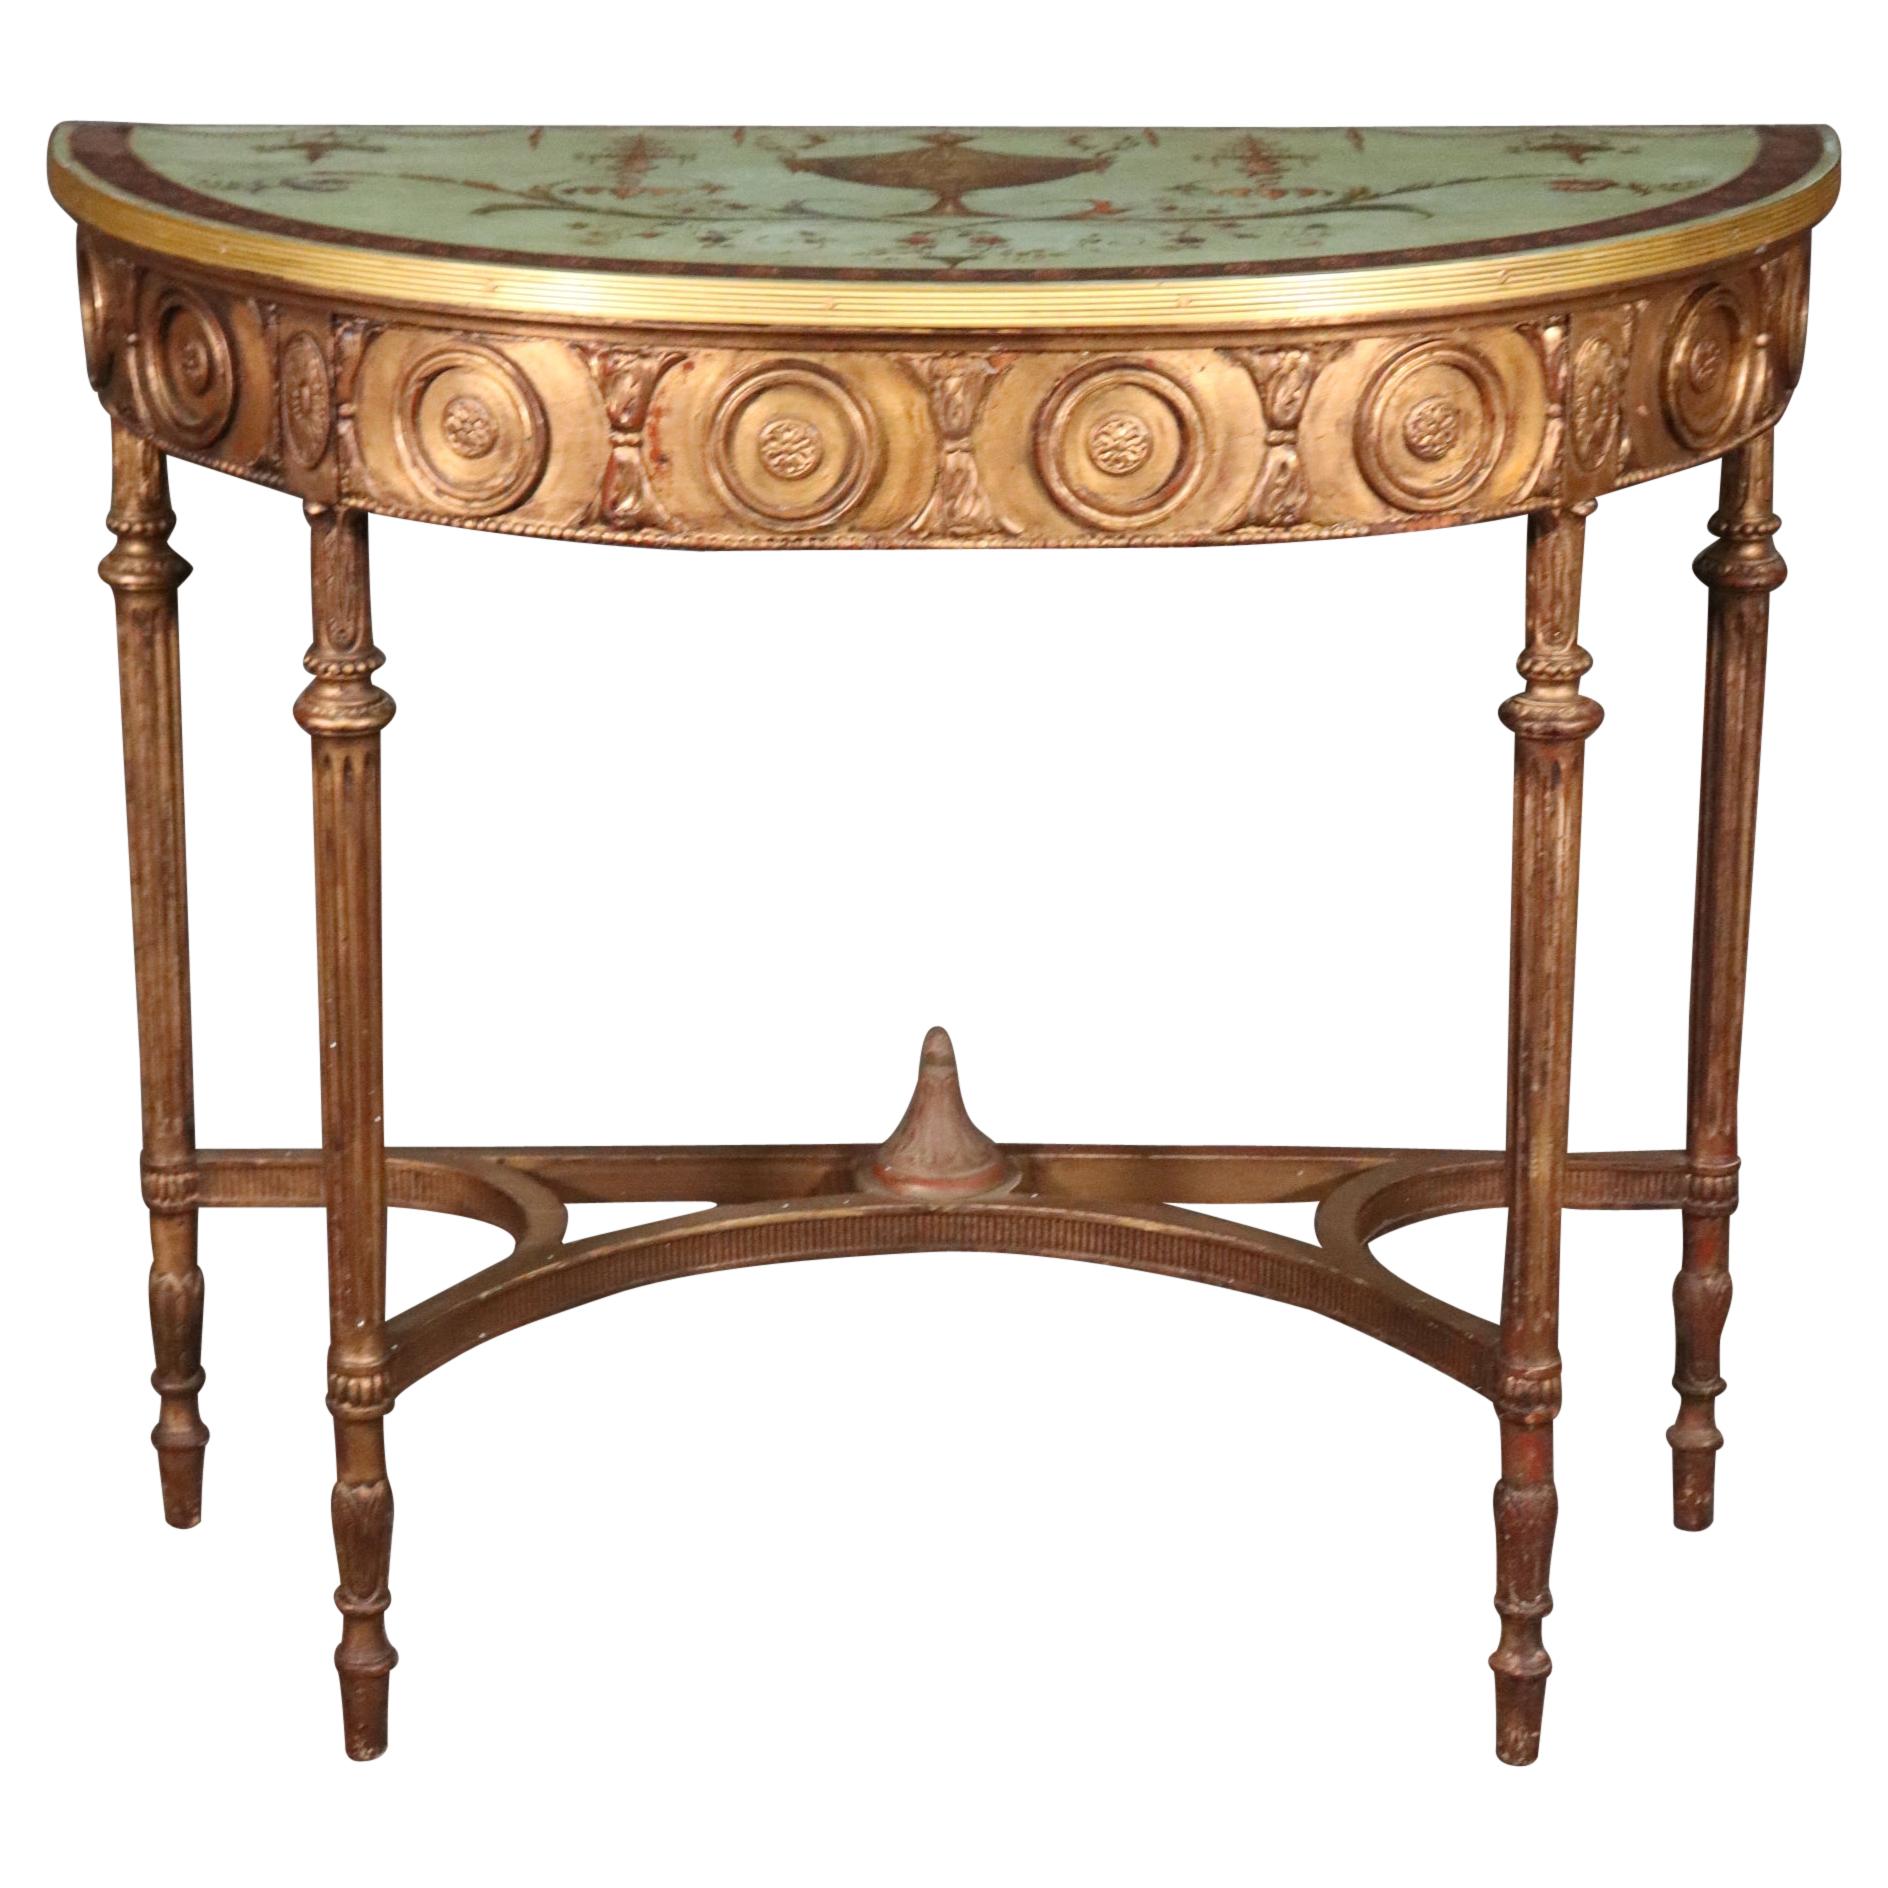 Fine Quality Paint Decorated Gilded Adams Demilune Console Table, Circa 1890 For Sale